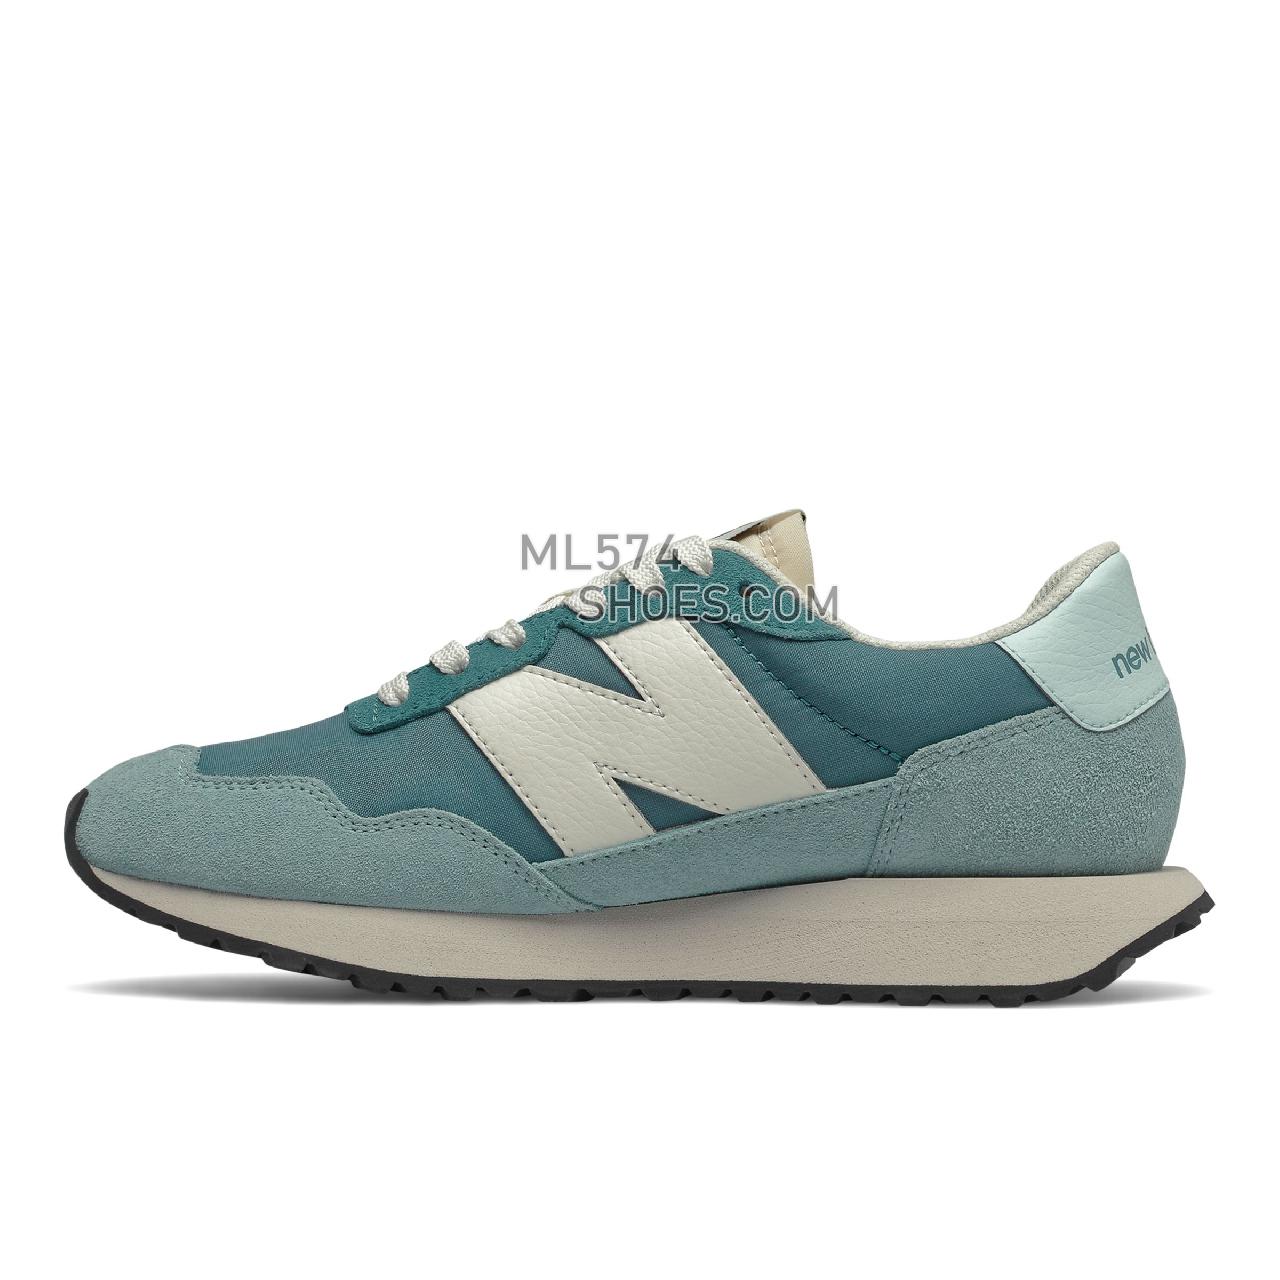 New Balance 237 - Women's Sport Style Sneakers - Deep Sea with Storm Blue - WS237DI1